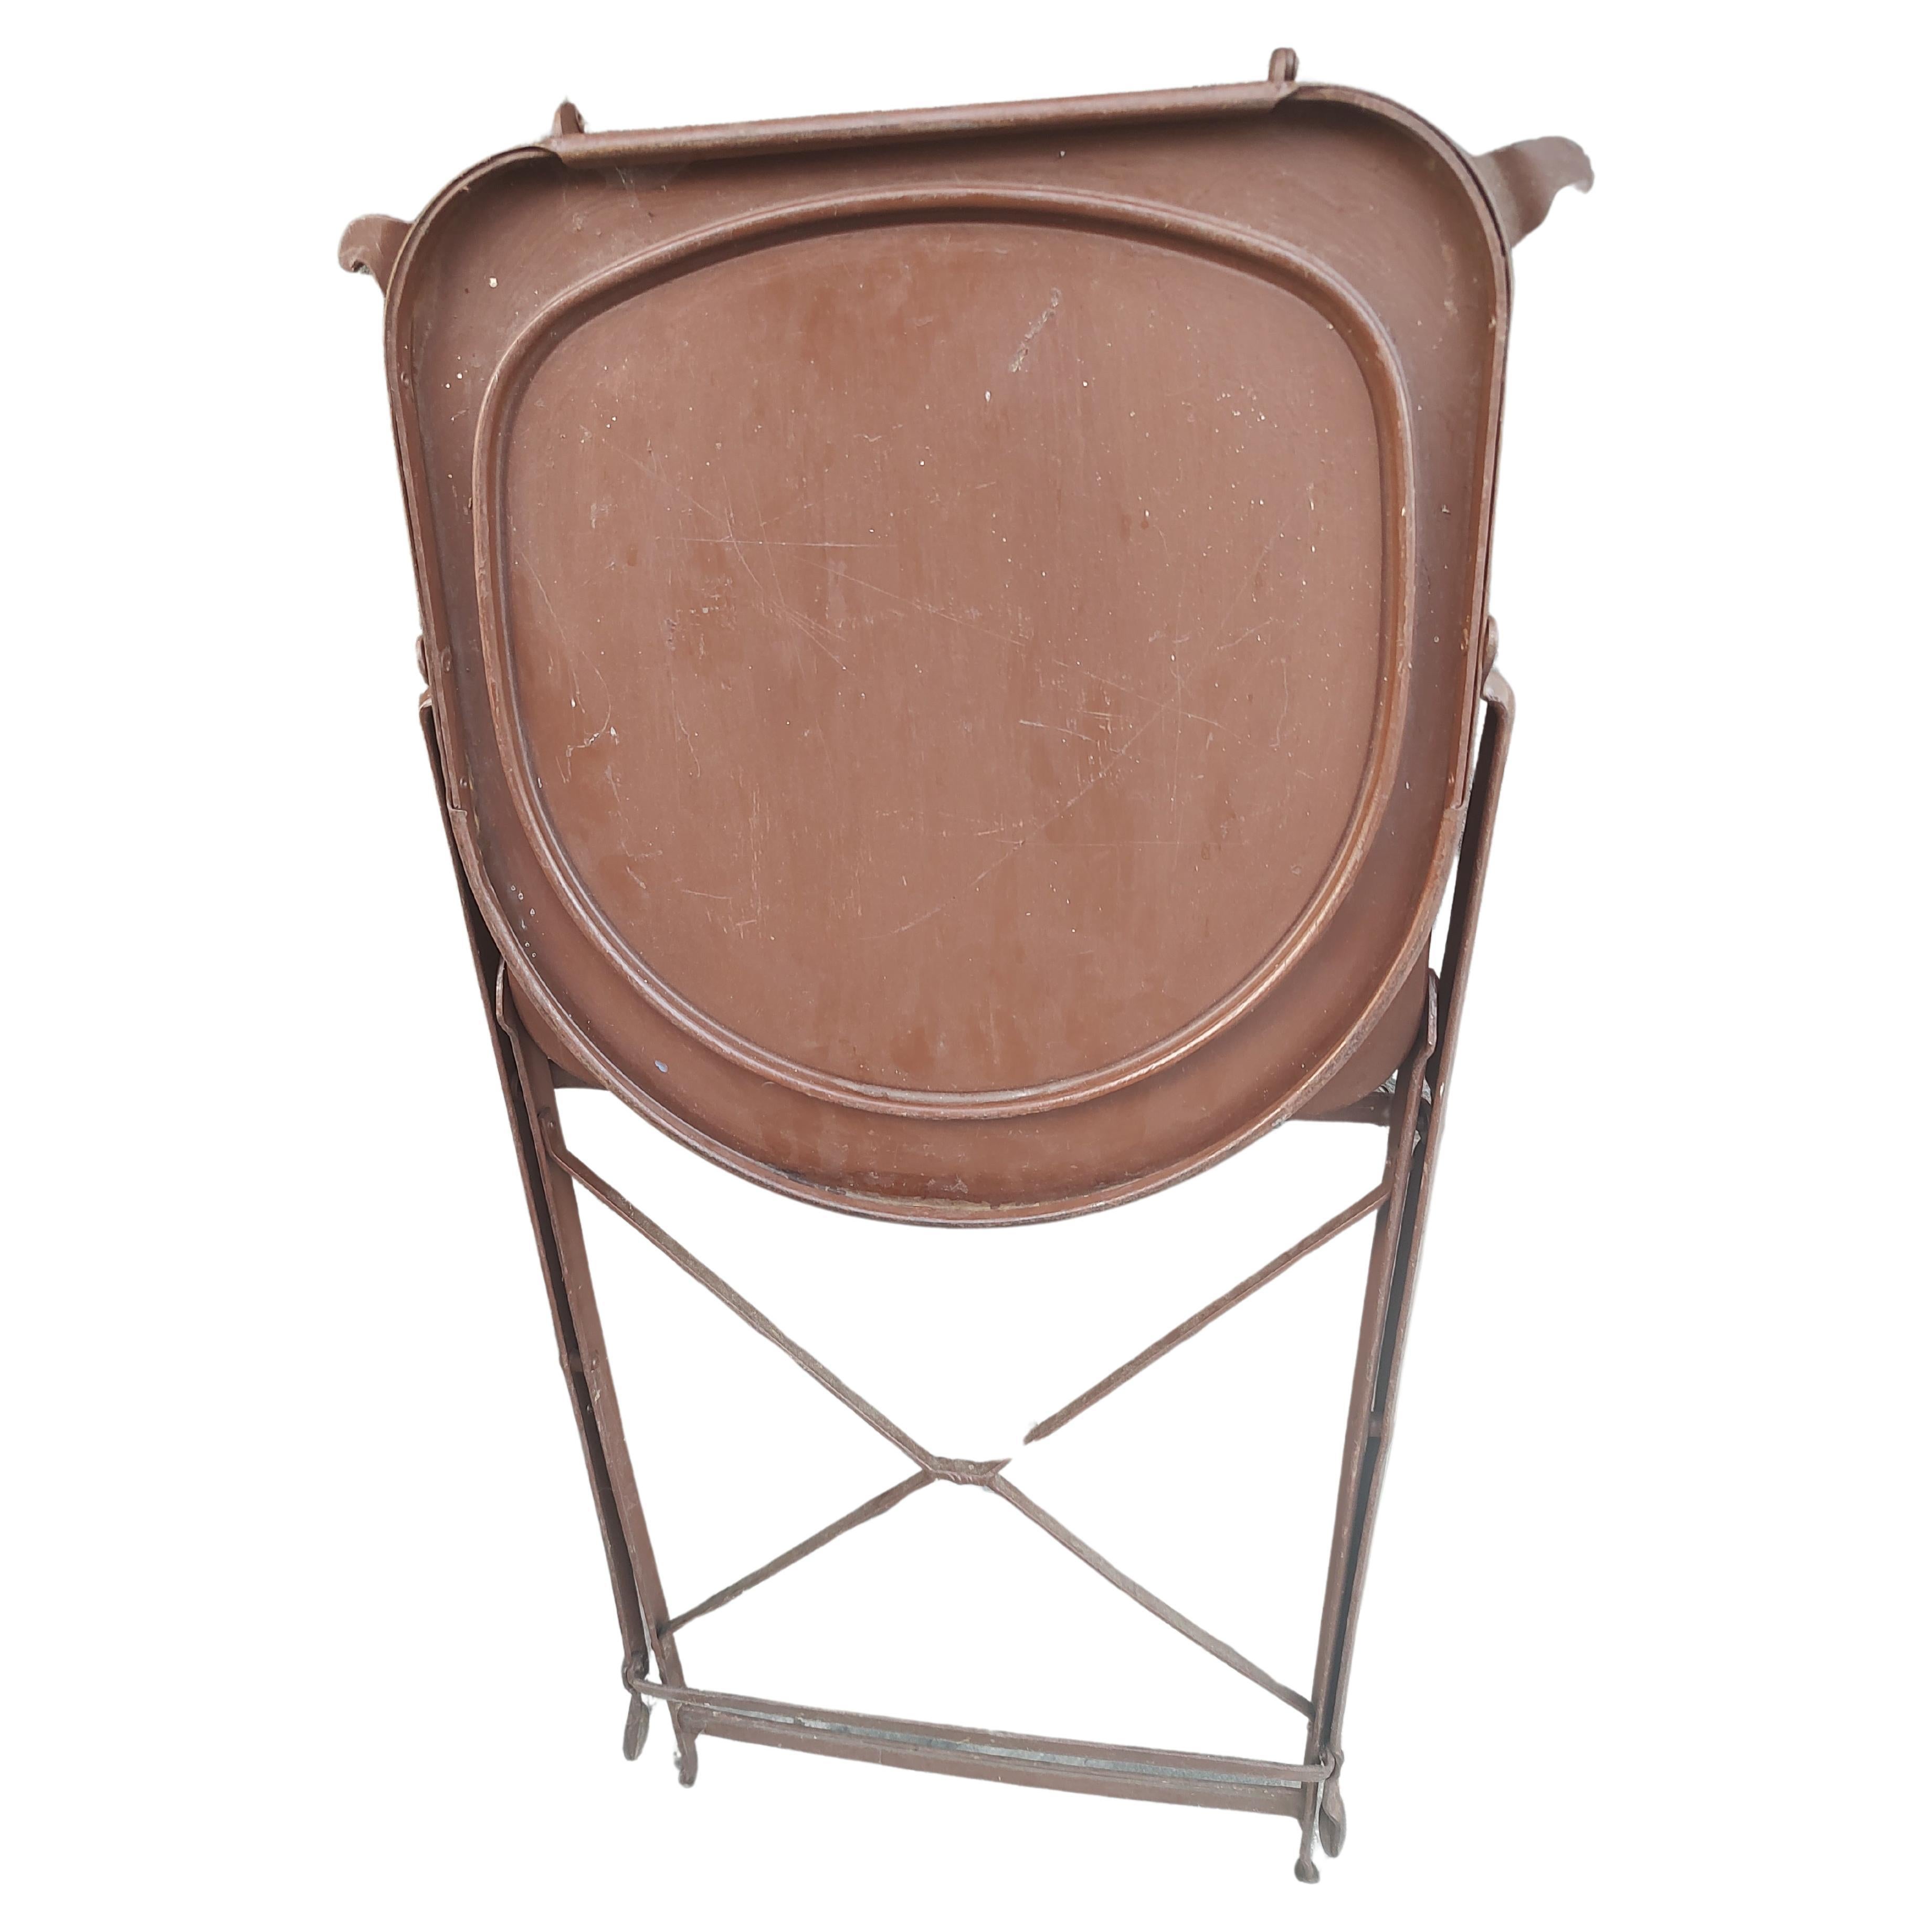 Set of 6 unique folding chairs. Seat & back collapse in a unique way, folding towards each other part. Chairs have been painted and recovered but the vinyl on a few chairs is undone, Loose. Nothing serious and we may get a chance to correct.